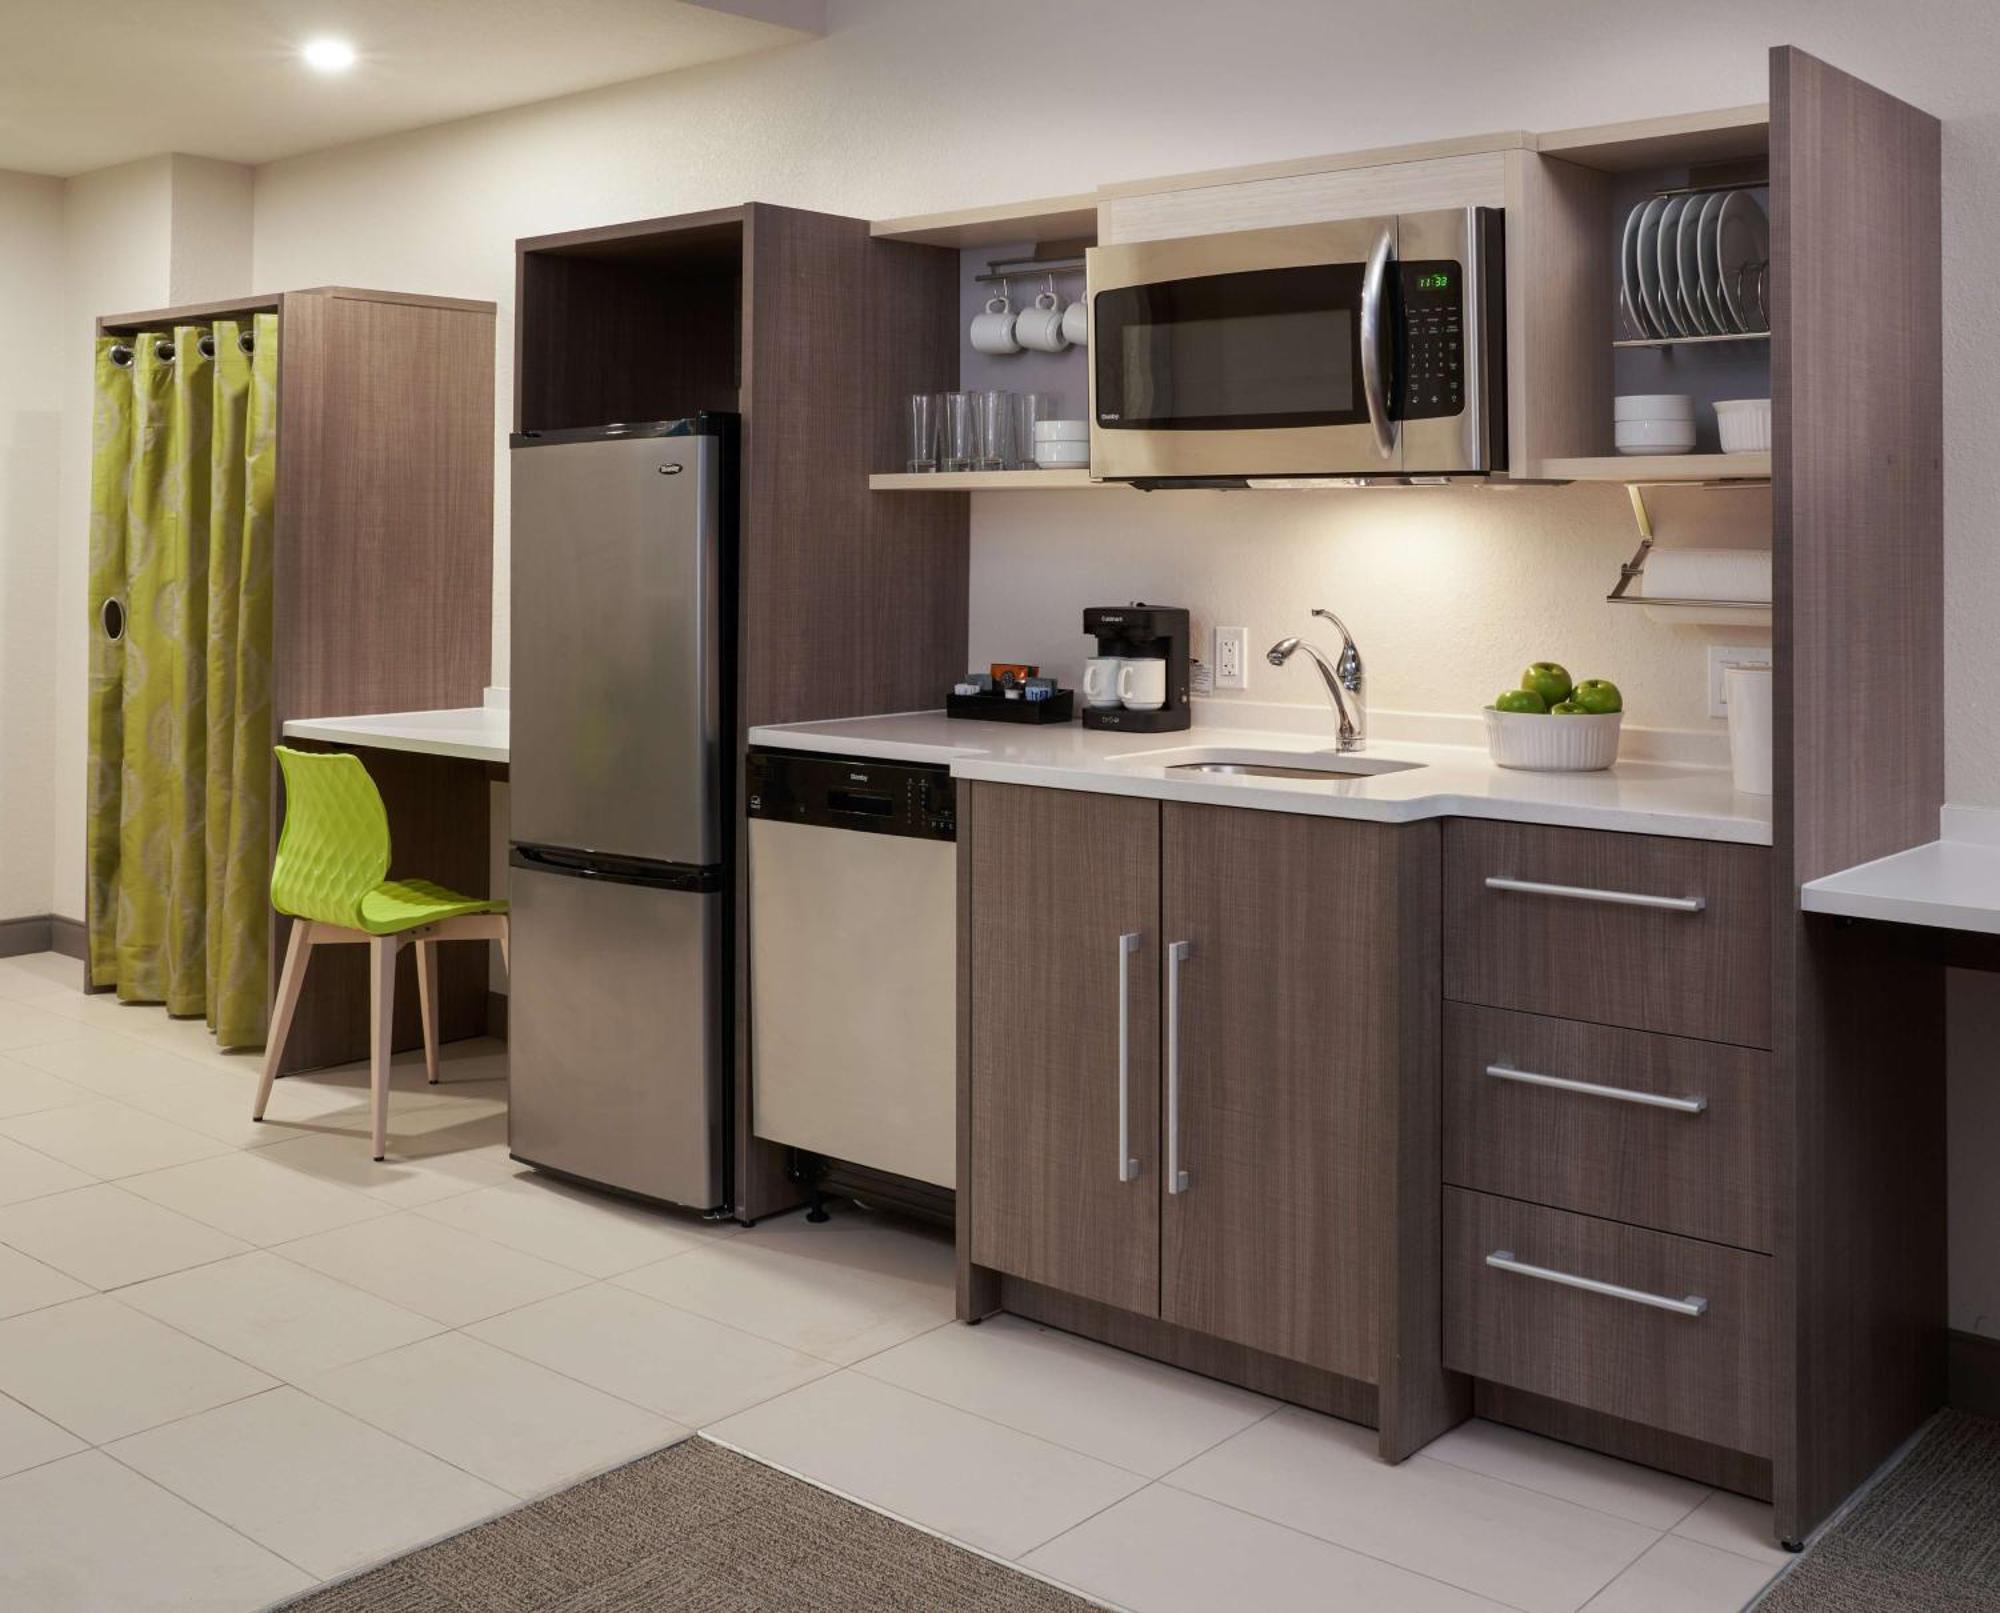 Home2 Suites By Hilton Ft. Lauderdale Downtown, Fl 포트 로더데일 외부 사진